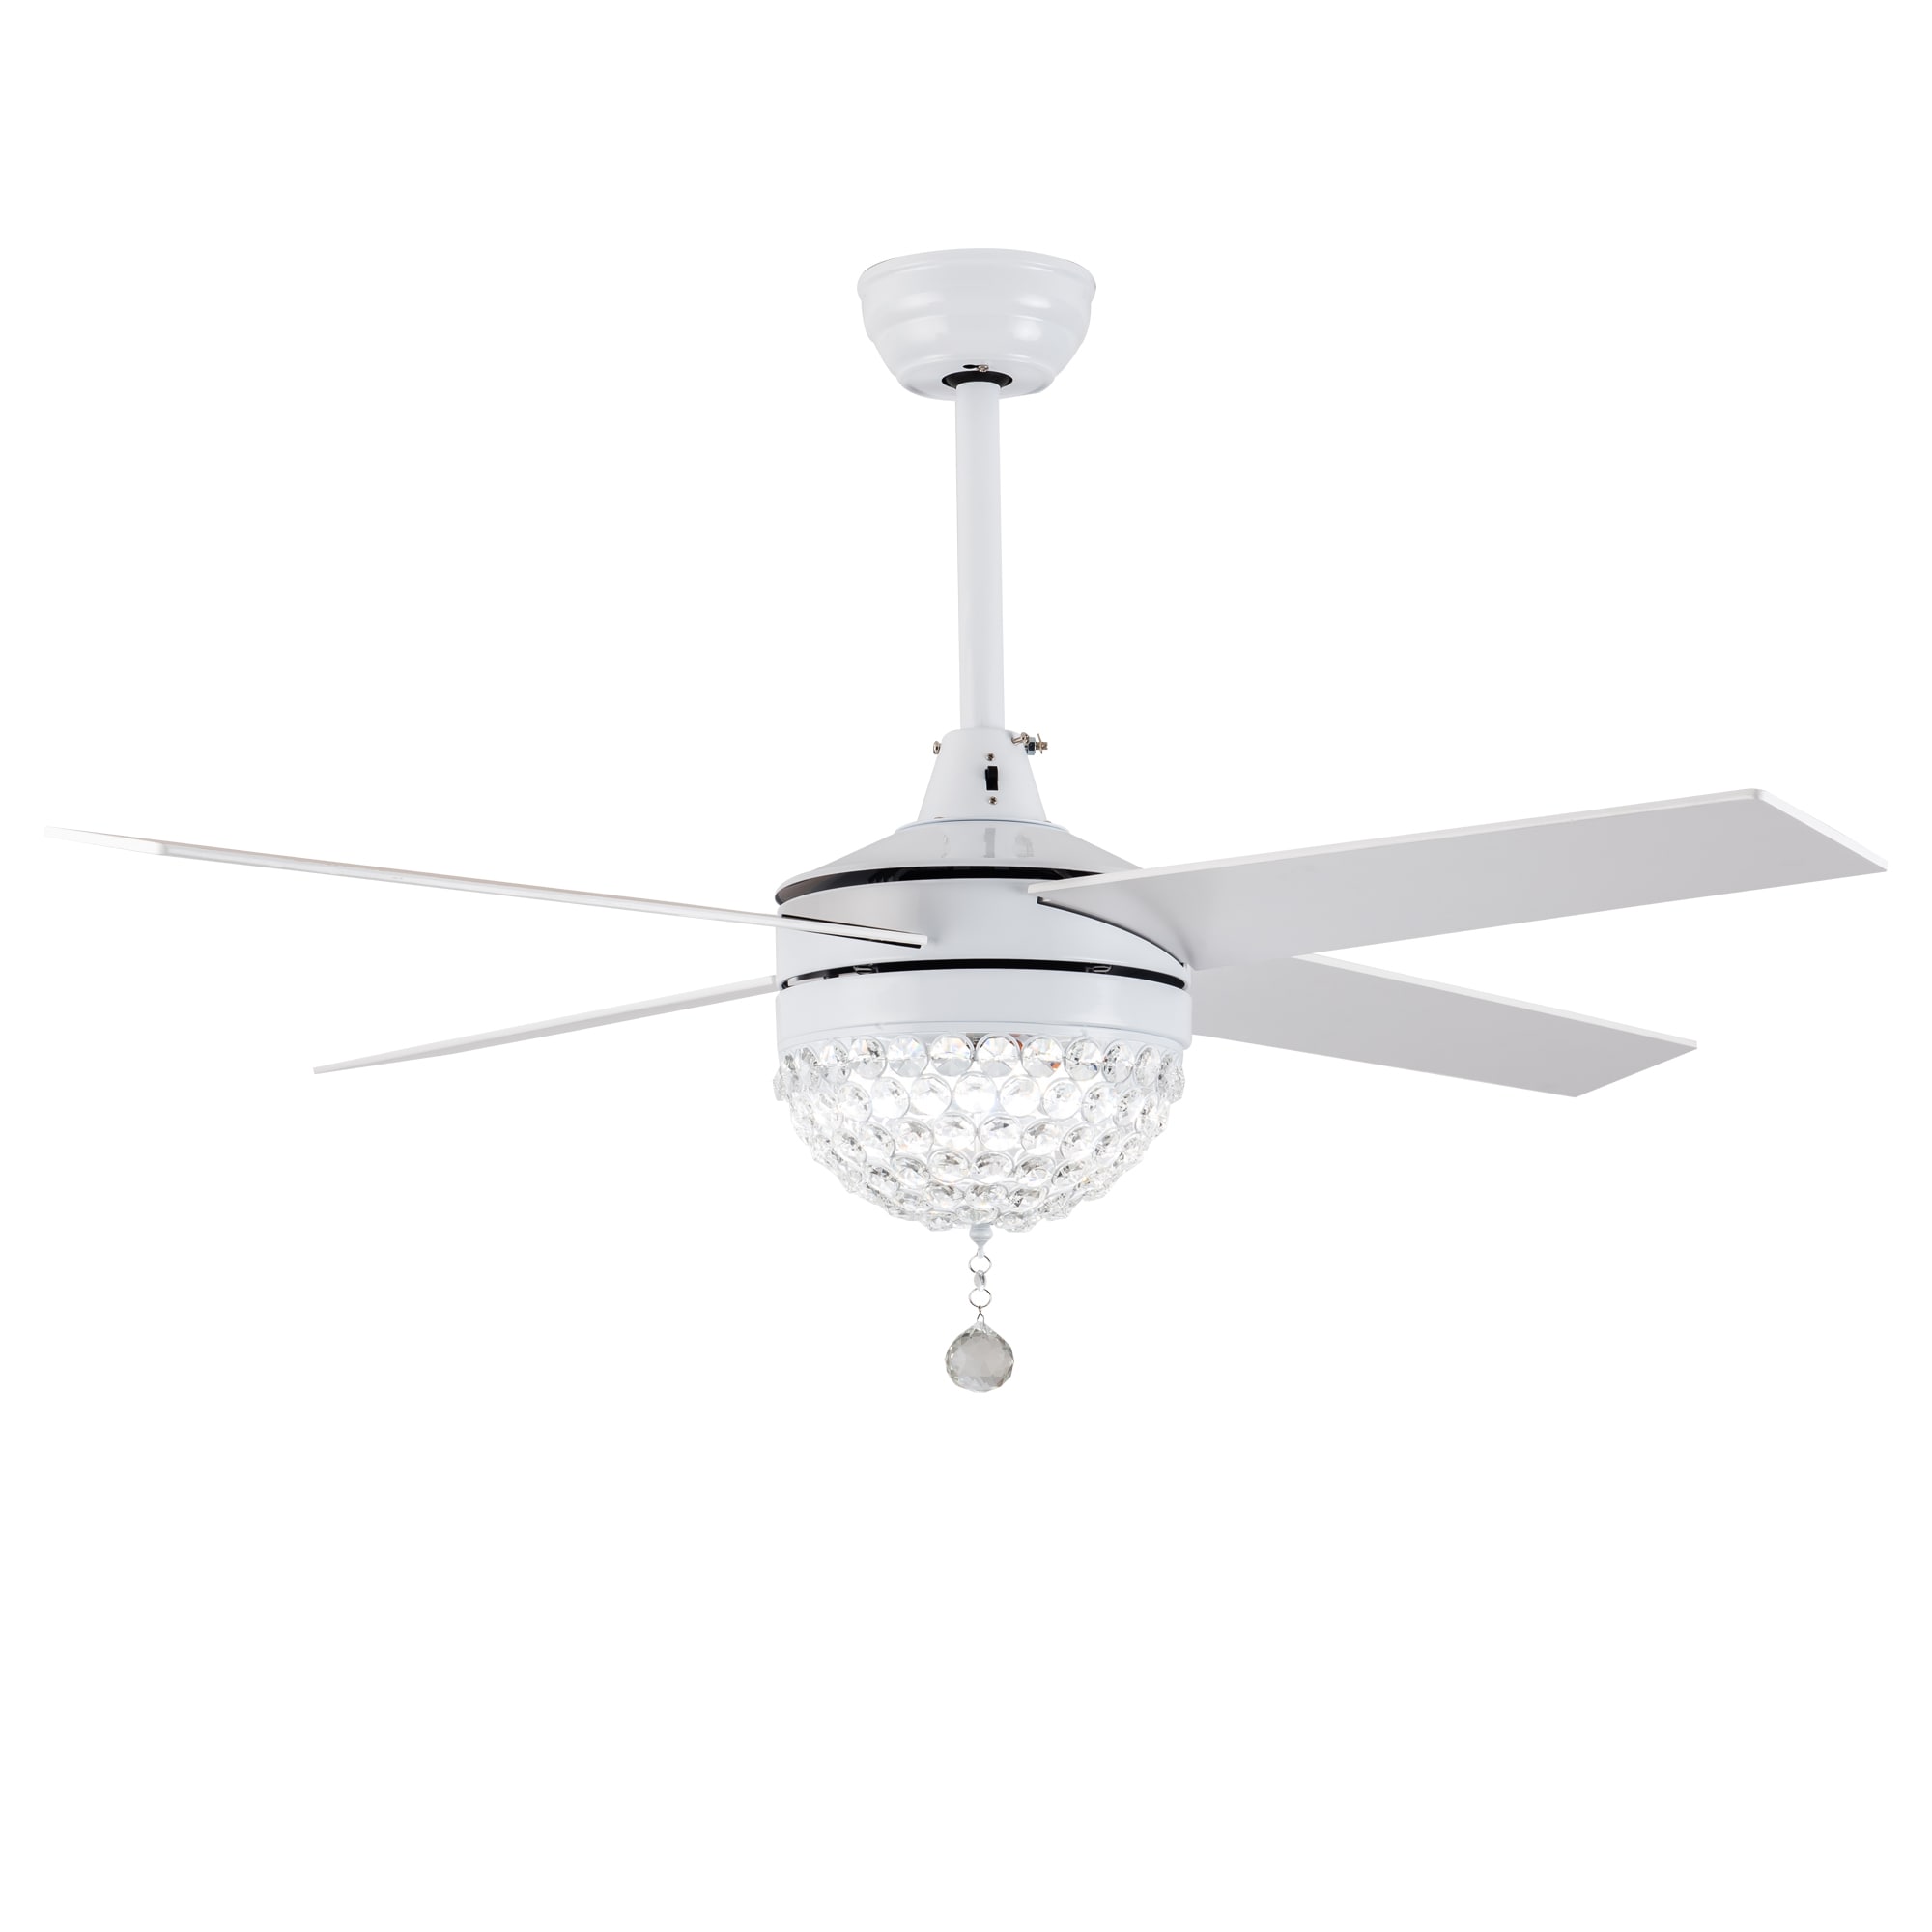 42" 4 Blades Ceiling Fan Lamp w/ Light Remote Control Dimmable LED Chandelier US 